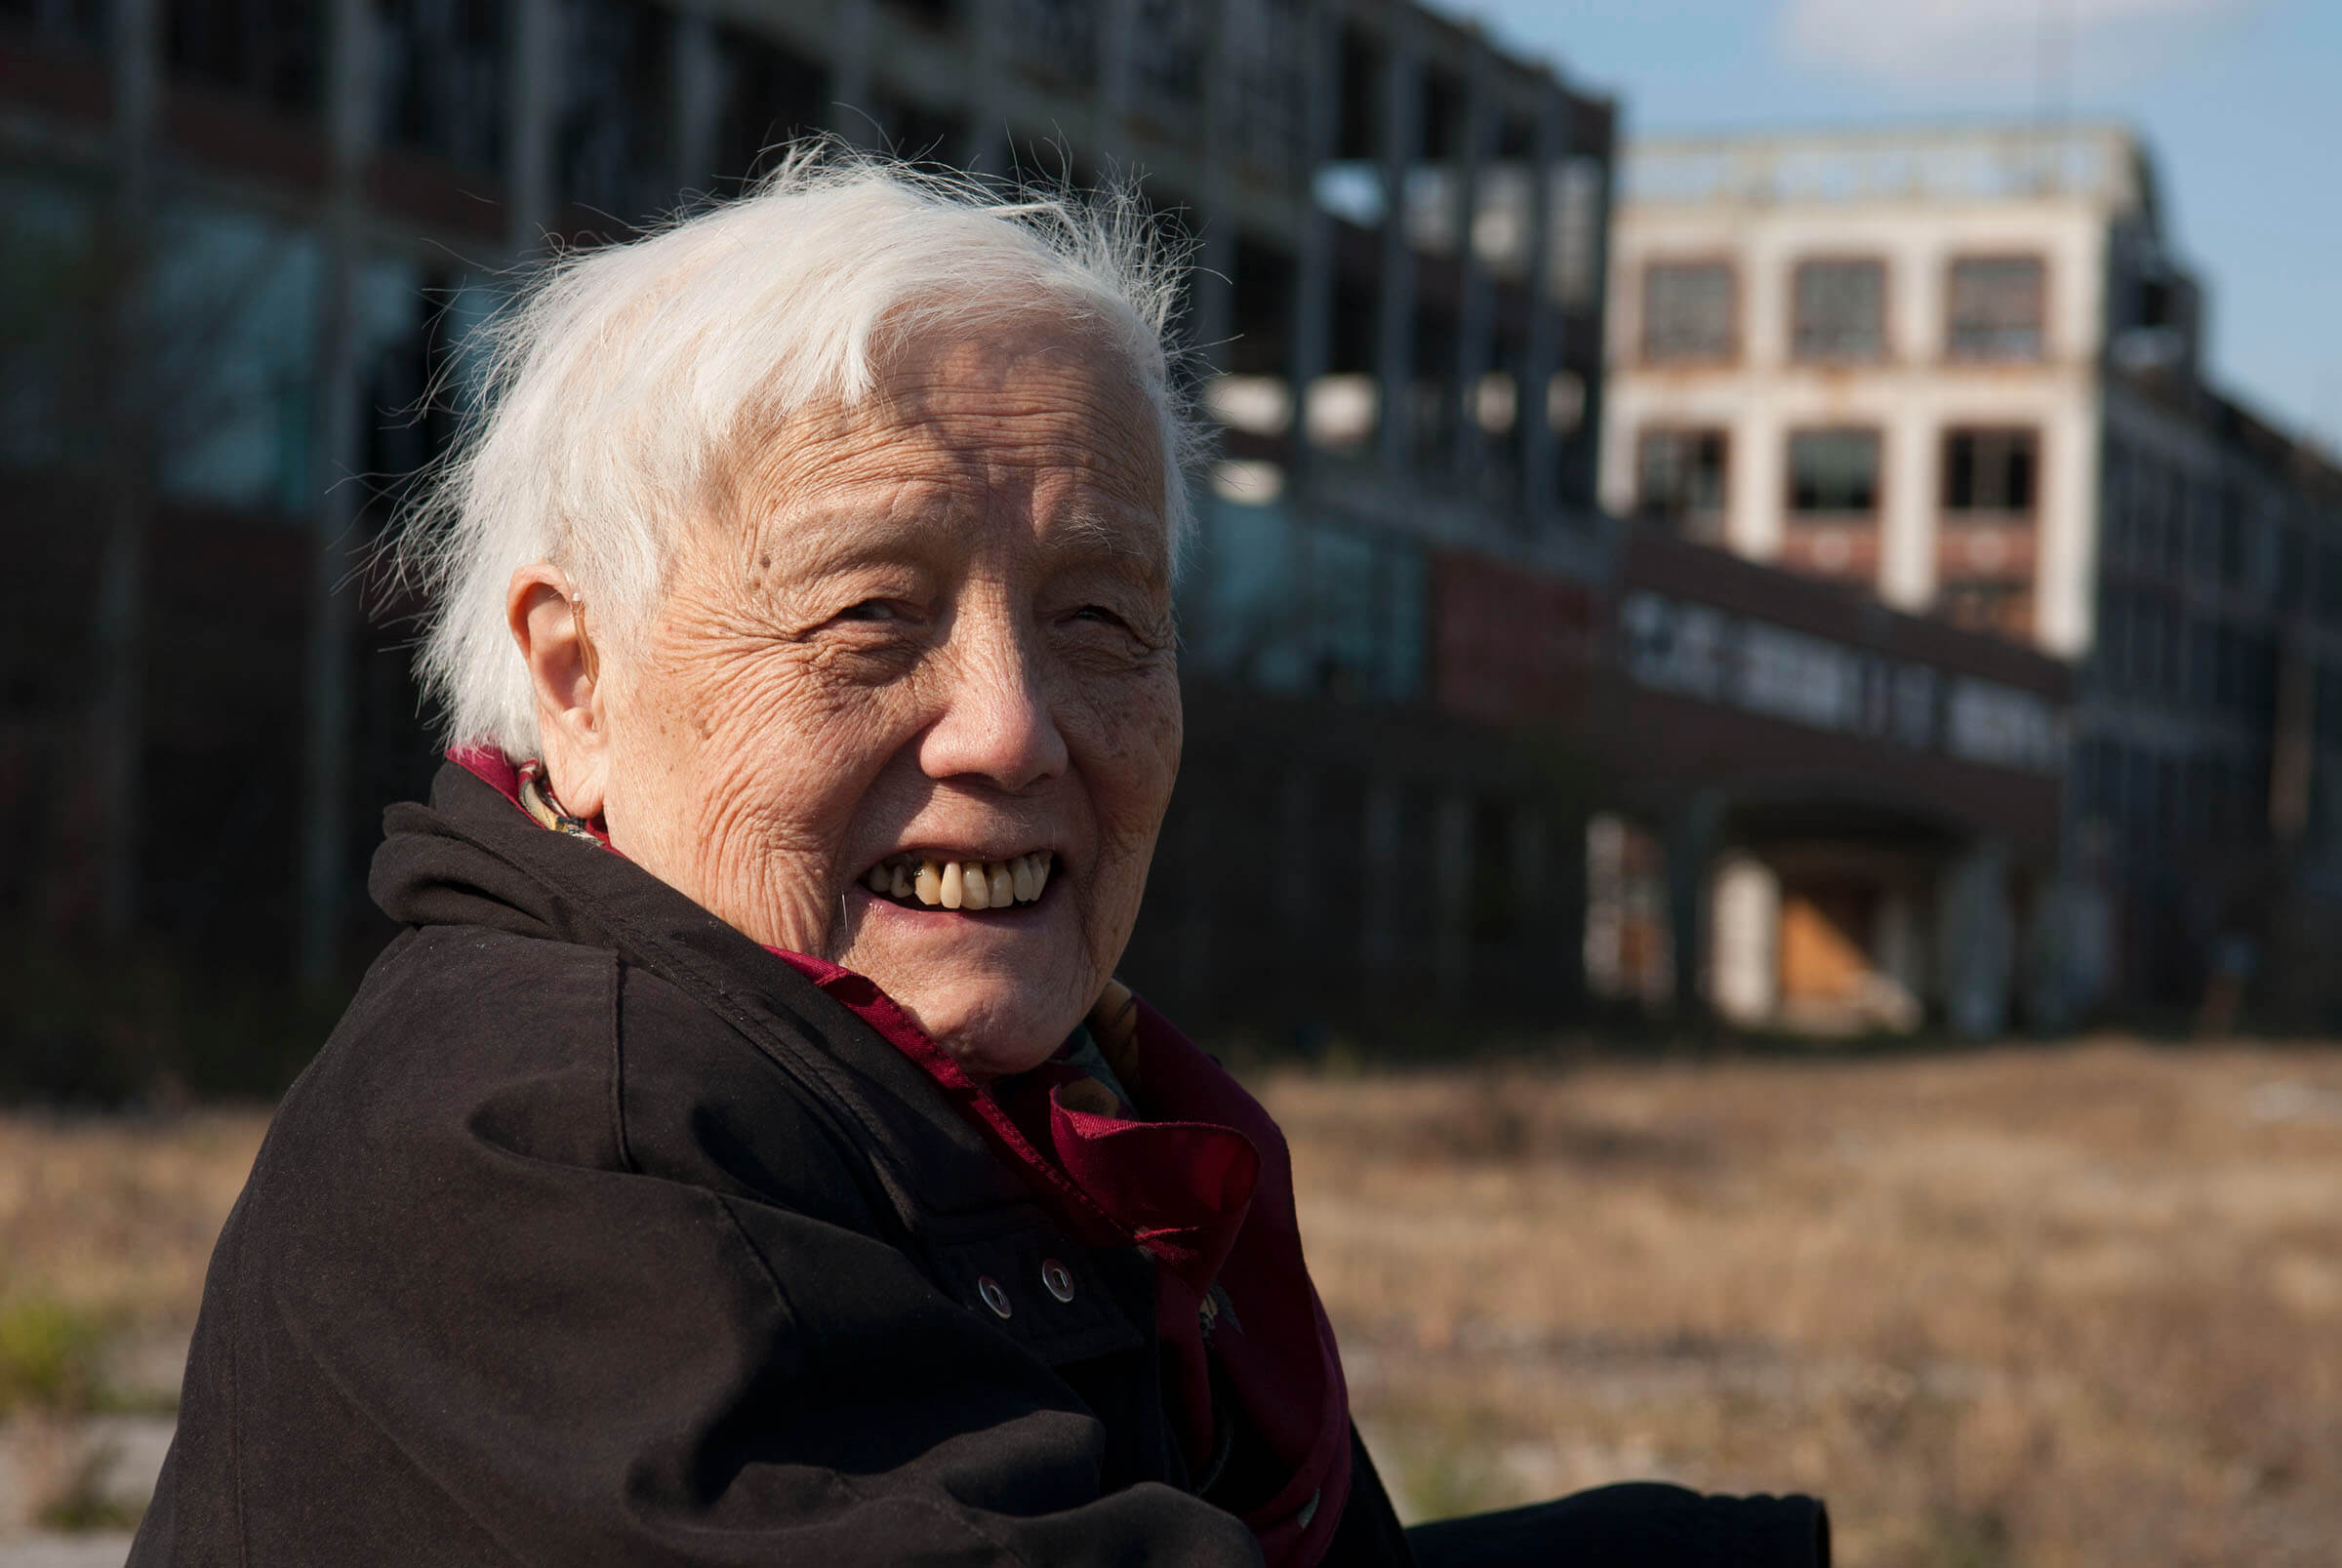 Stil from Grace Lee American Revolutionary: The Evolution of Grace Lee Boggs. Grace Lee Boggs is looking directly at the camera and smiling, she has white short hair, and is wearing a black warm jacket.